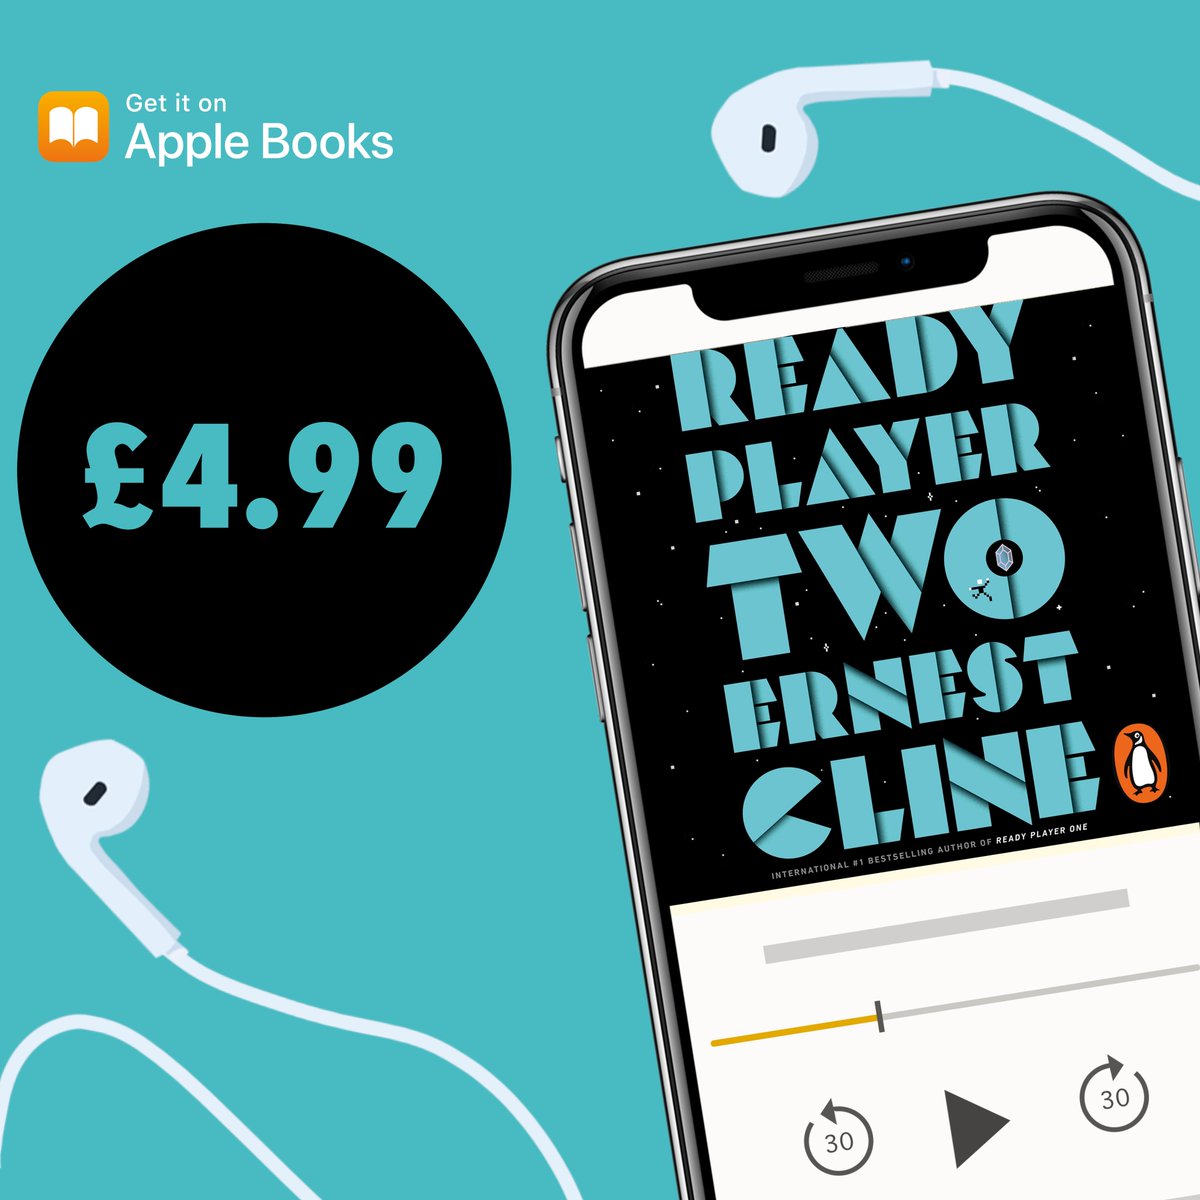 The audiobook of Ernest Cline’s epic sequel is only £4.99 until 19th April on Apple Books! 

READY PLAYER TWO is brilliantly narrated by Wil Wheaton and will have you glued to your headphones. 

You can download it here: https://t.co/B13Whdw3lh https://t.co/glCXsNwdPq